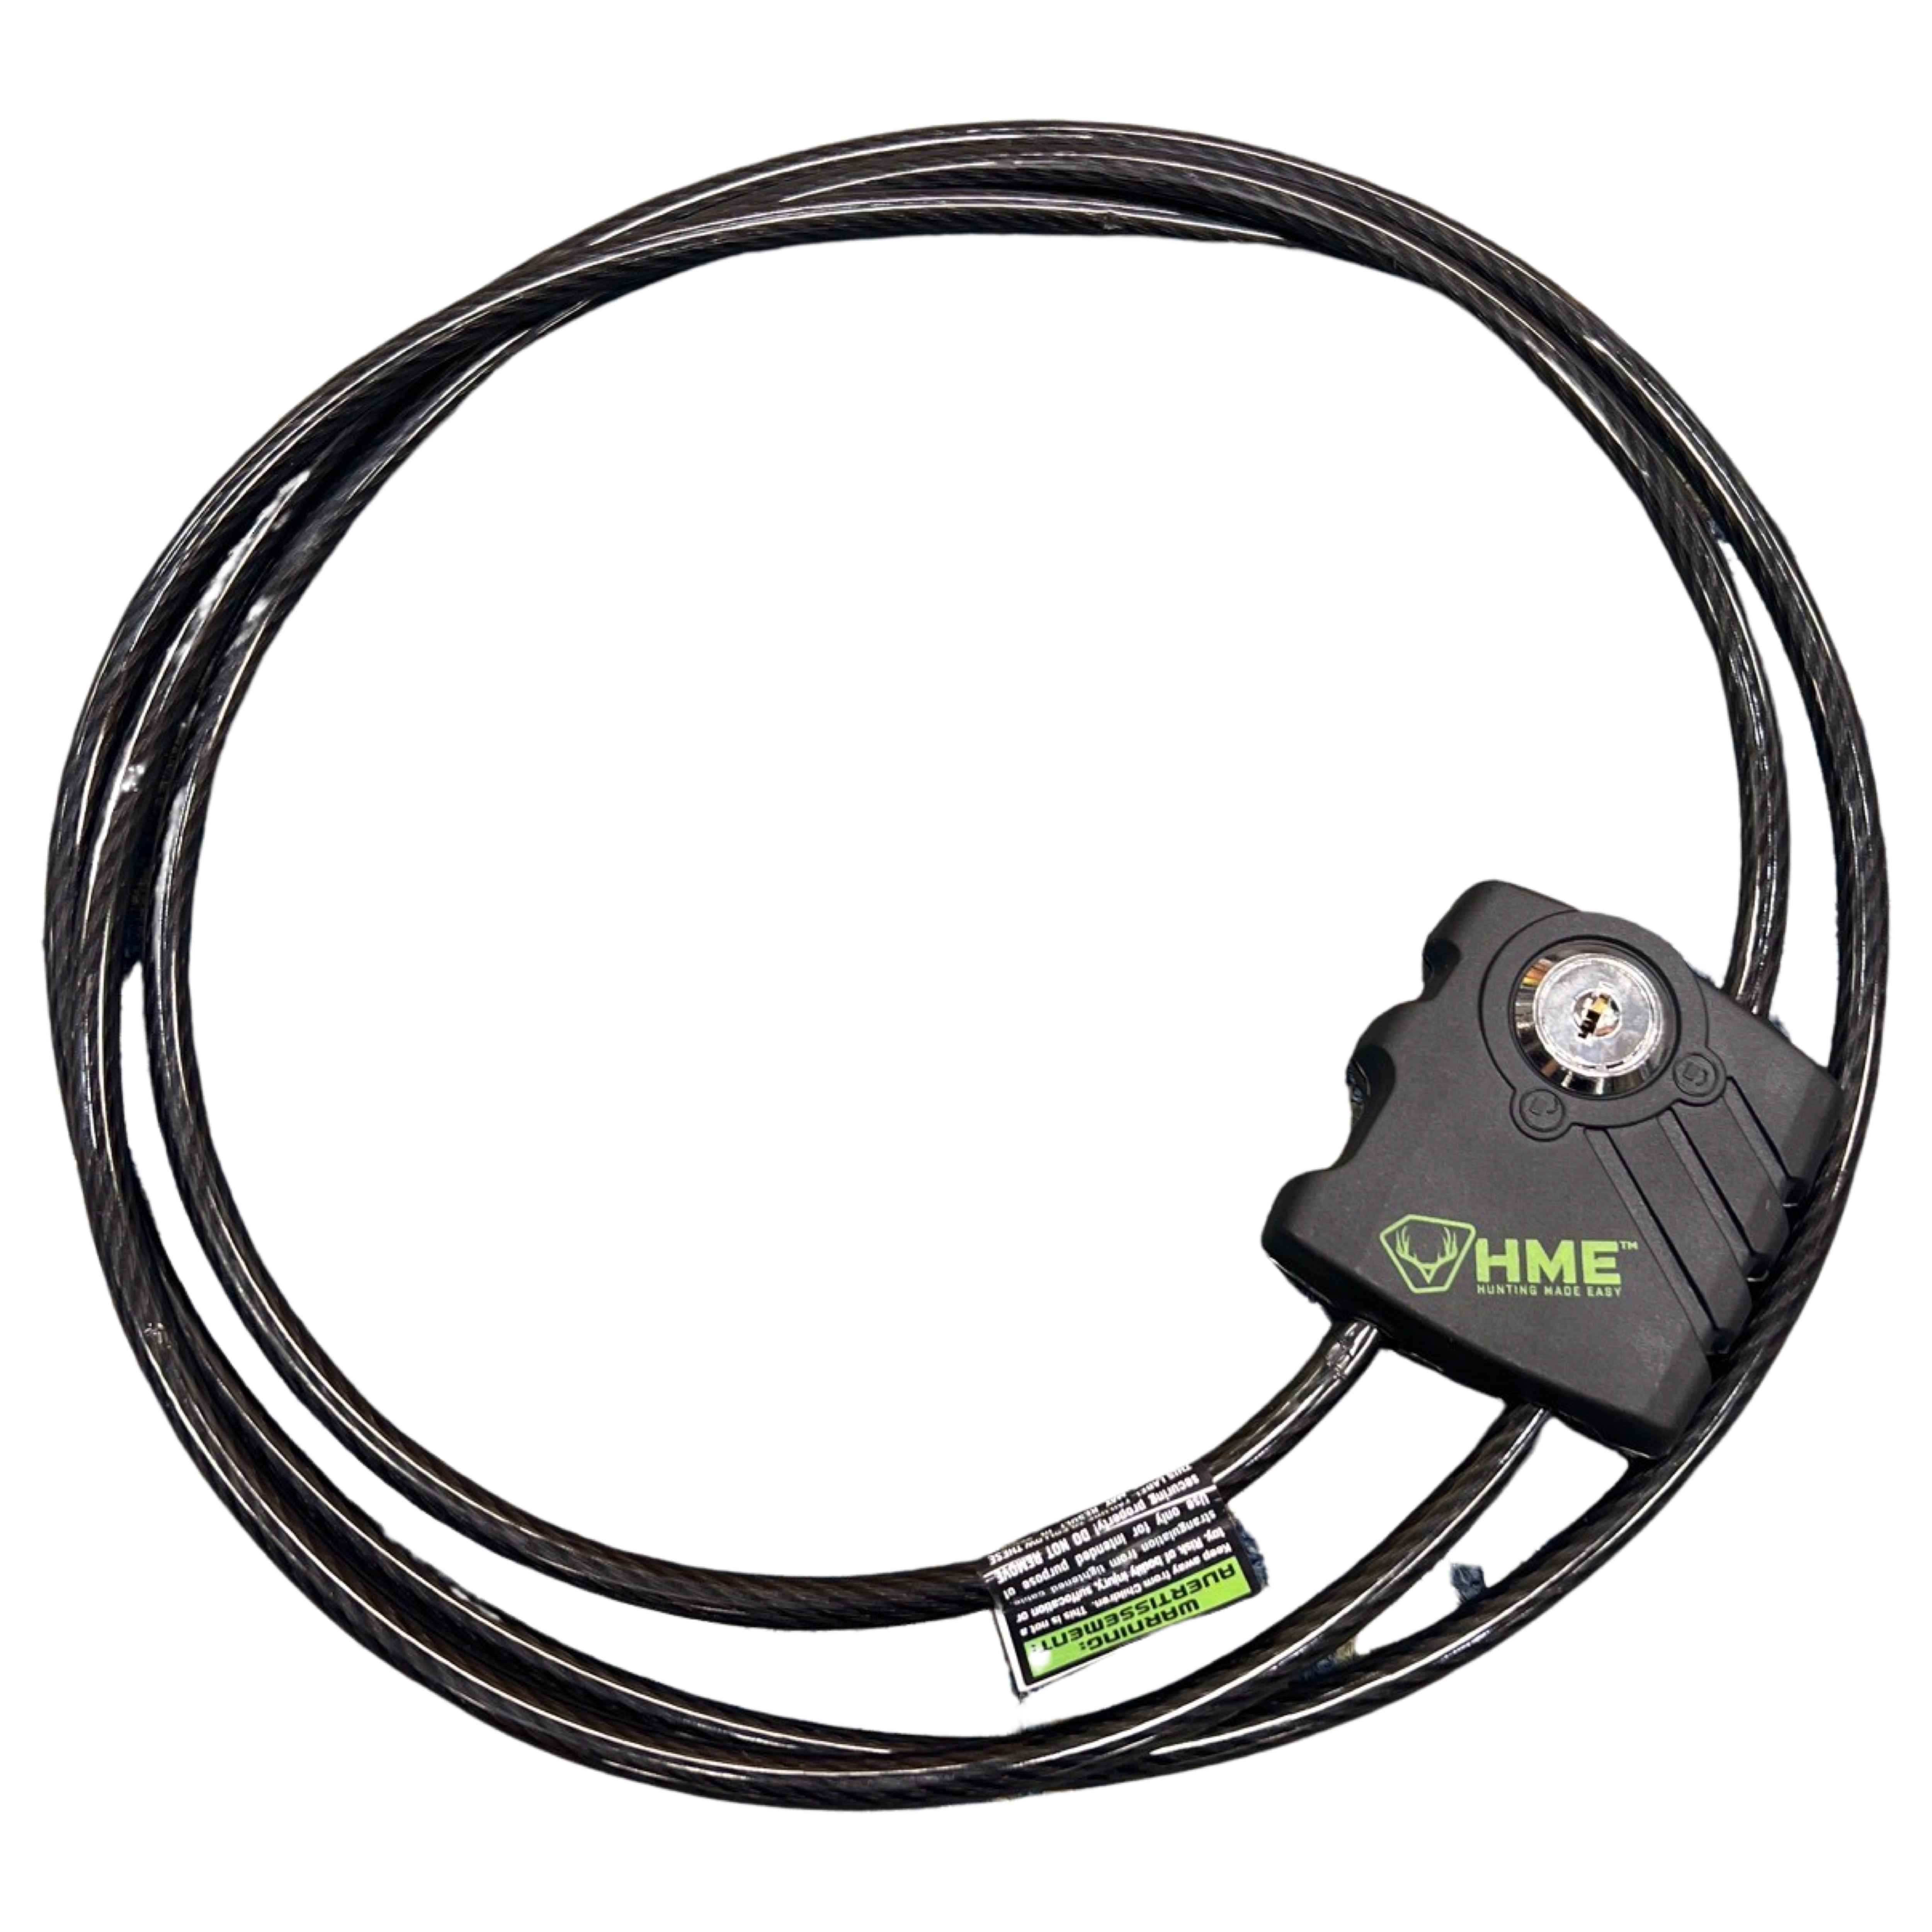 Python Adjustable Locking Cable for Trail Camera